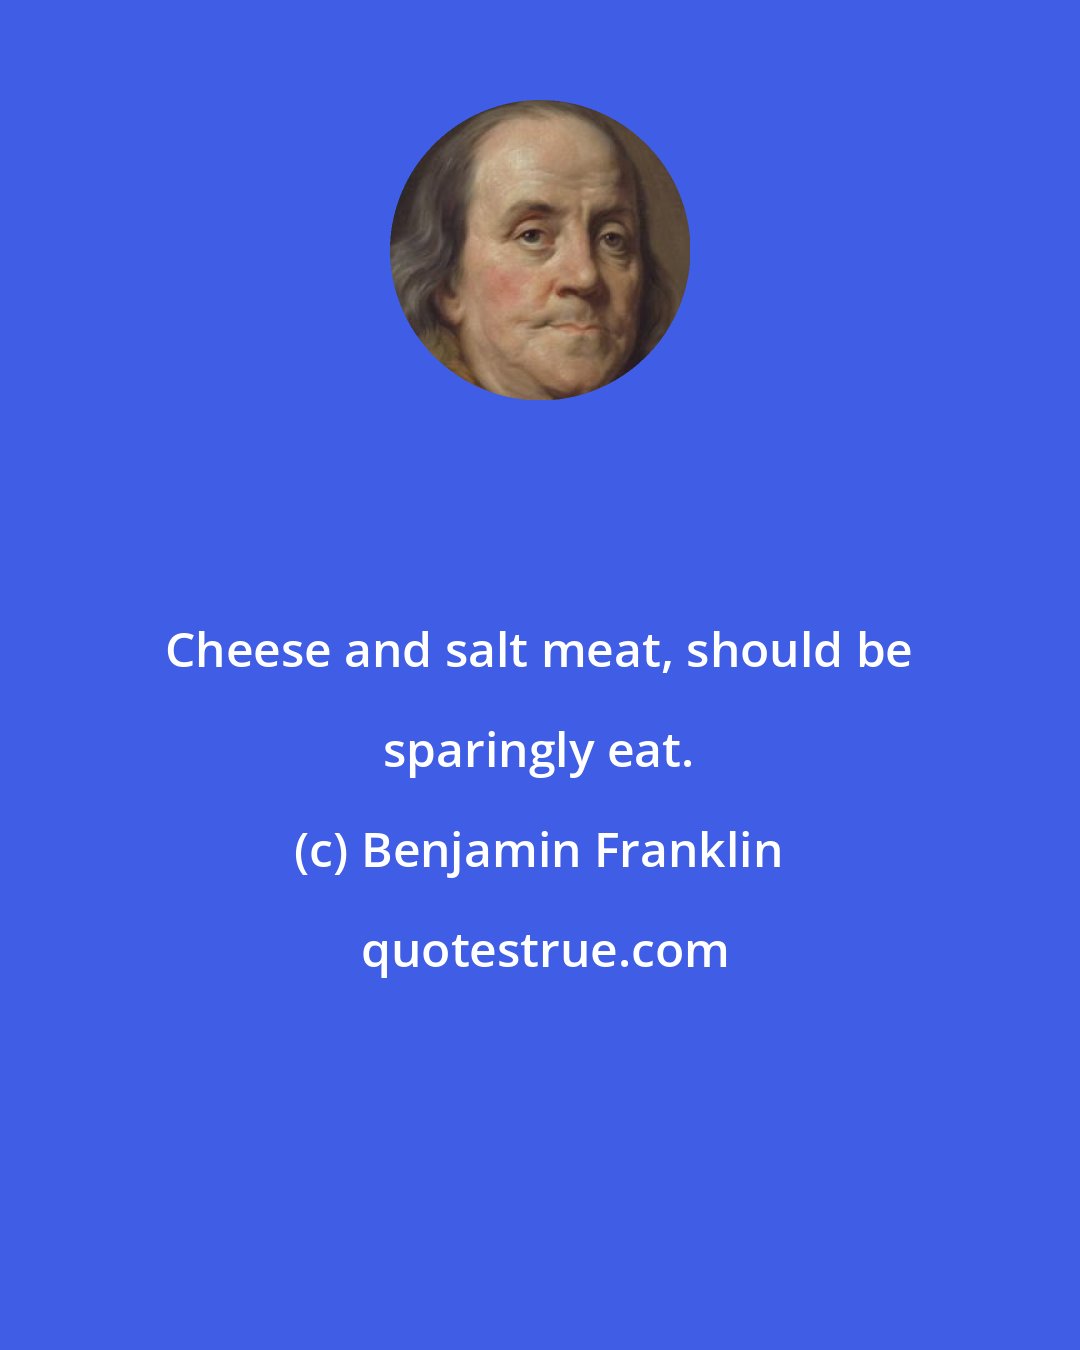 Benjamin Franklin: Cheese and salt meat, should be sparingly eat.